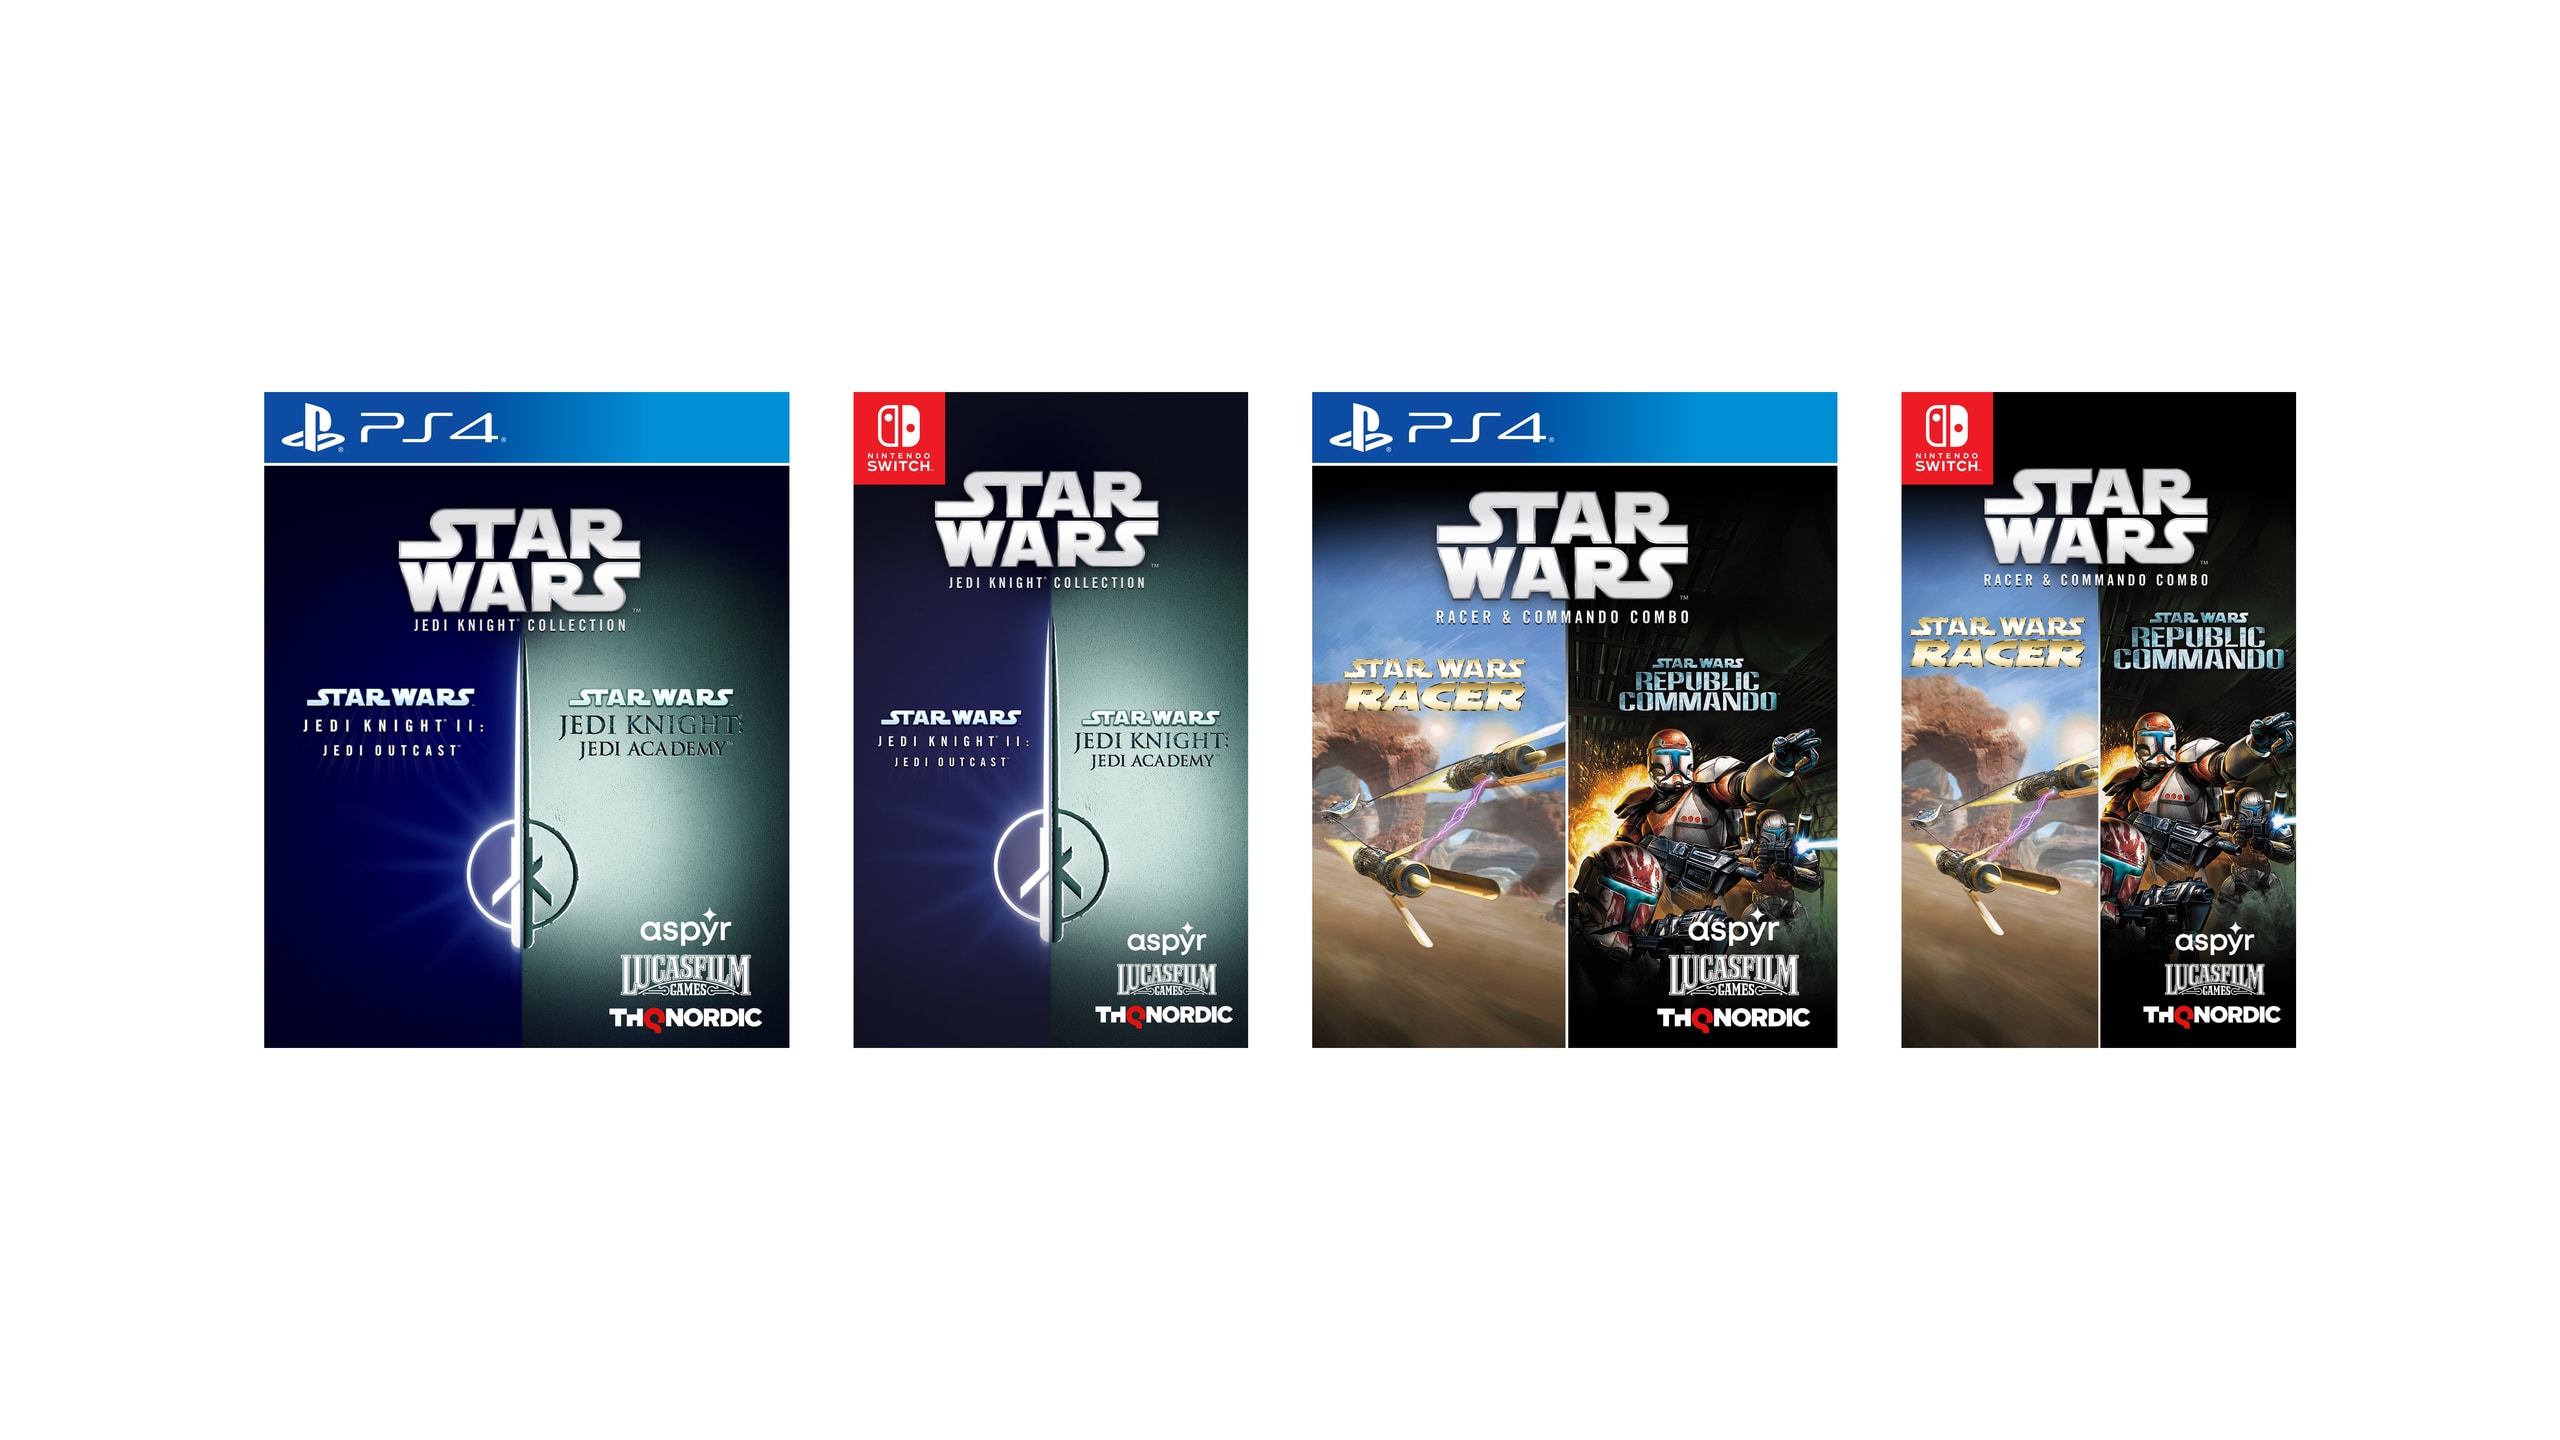 Star Wars Jedi Knight Collection and Star Racer and Commando Combo launch October 26 for PS4, November 16 for Switch - Gematsu